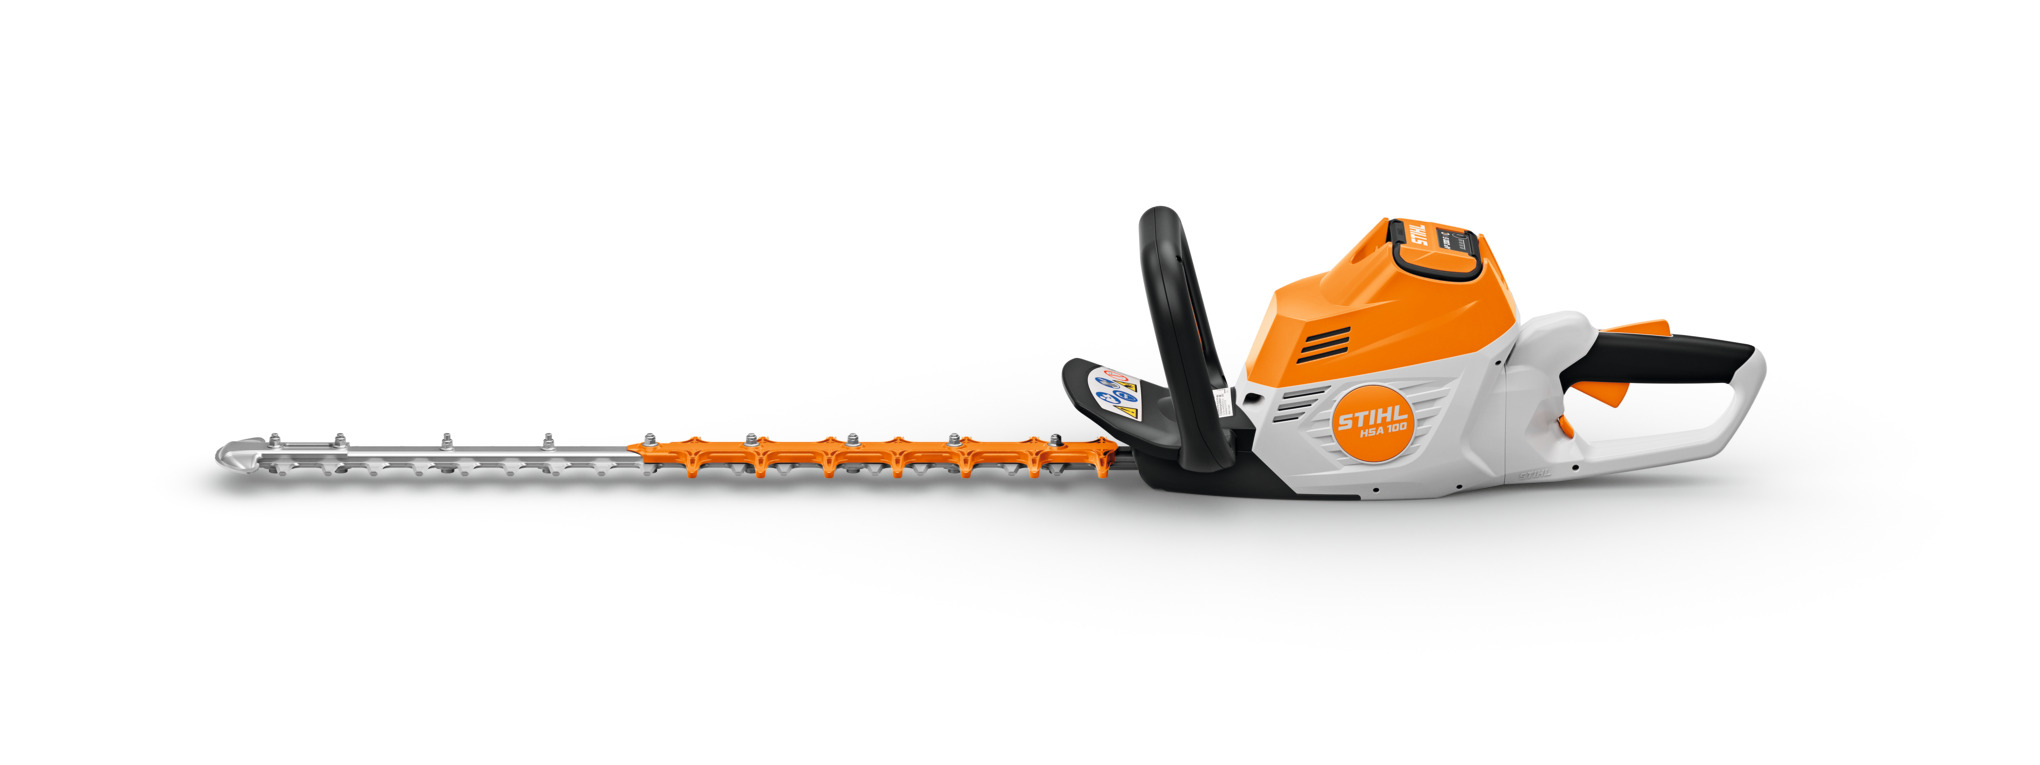 HSA 100 Battery Hedge Trimmer - AP System